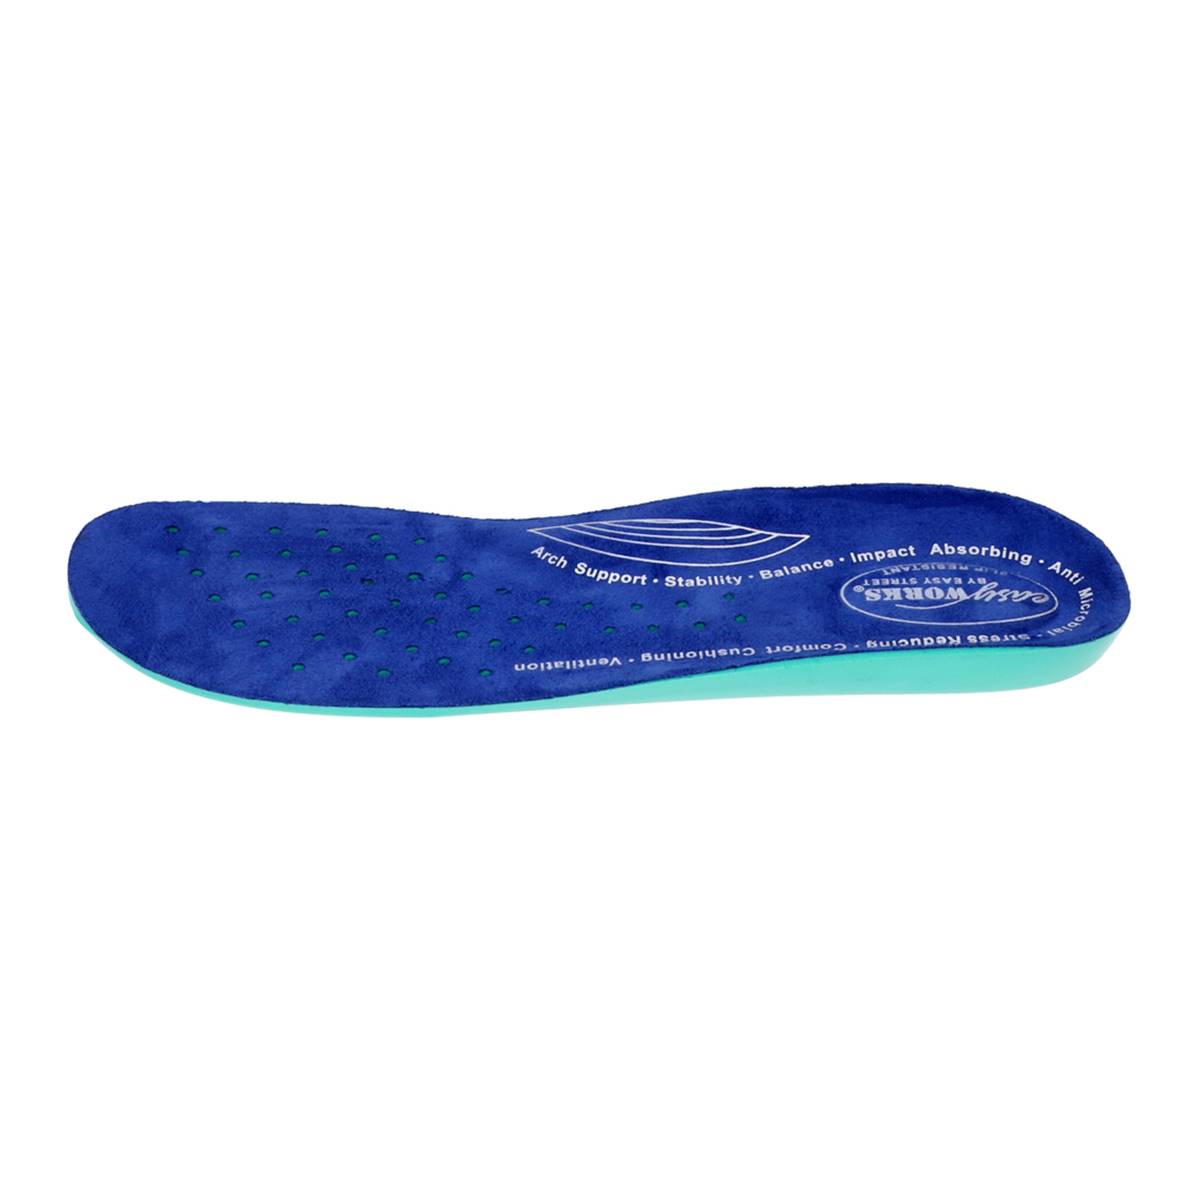 Womens Easy Works By Easy Street Replacement Insoles